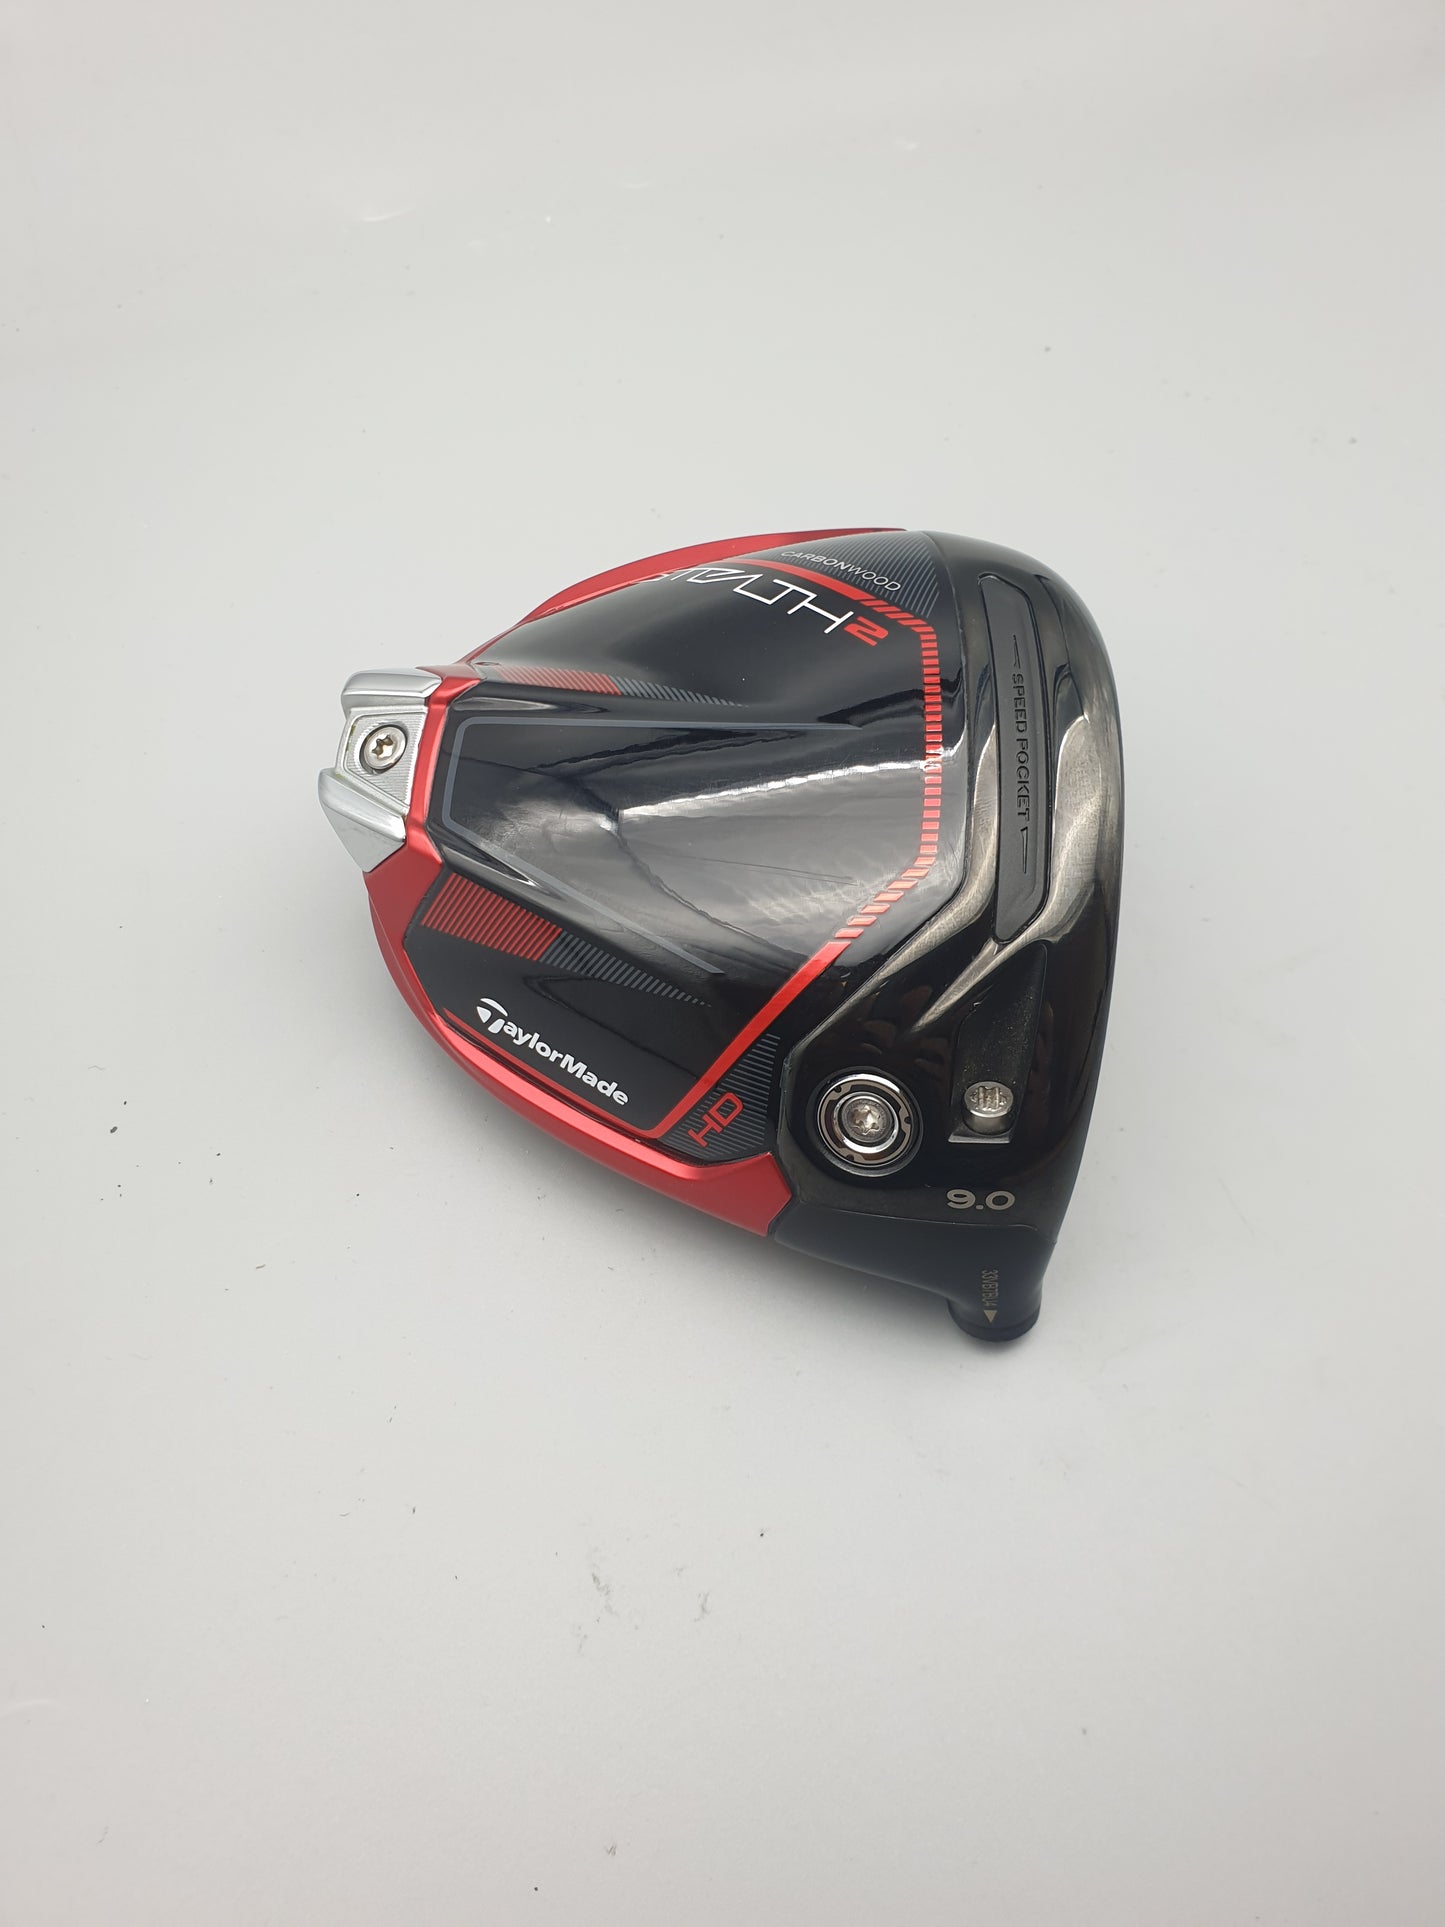 Taylormade Stealth 2 Driver HD 9.0 Proforce 5F3 HL Right Hand - USED